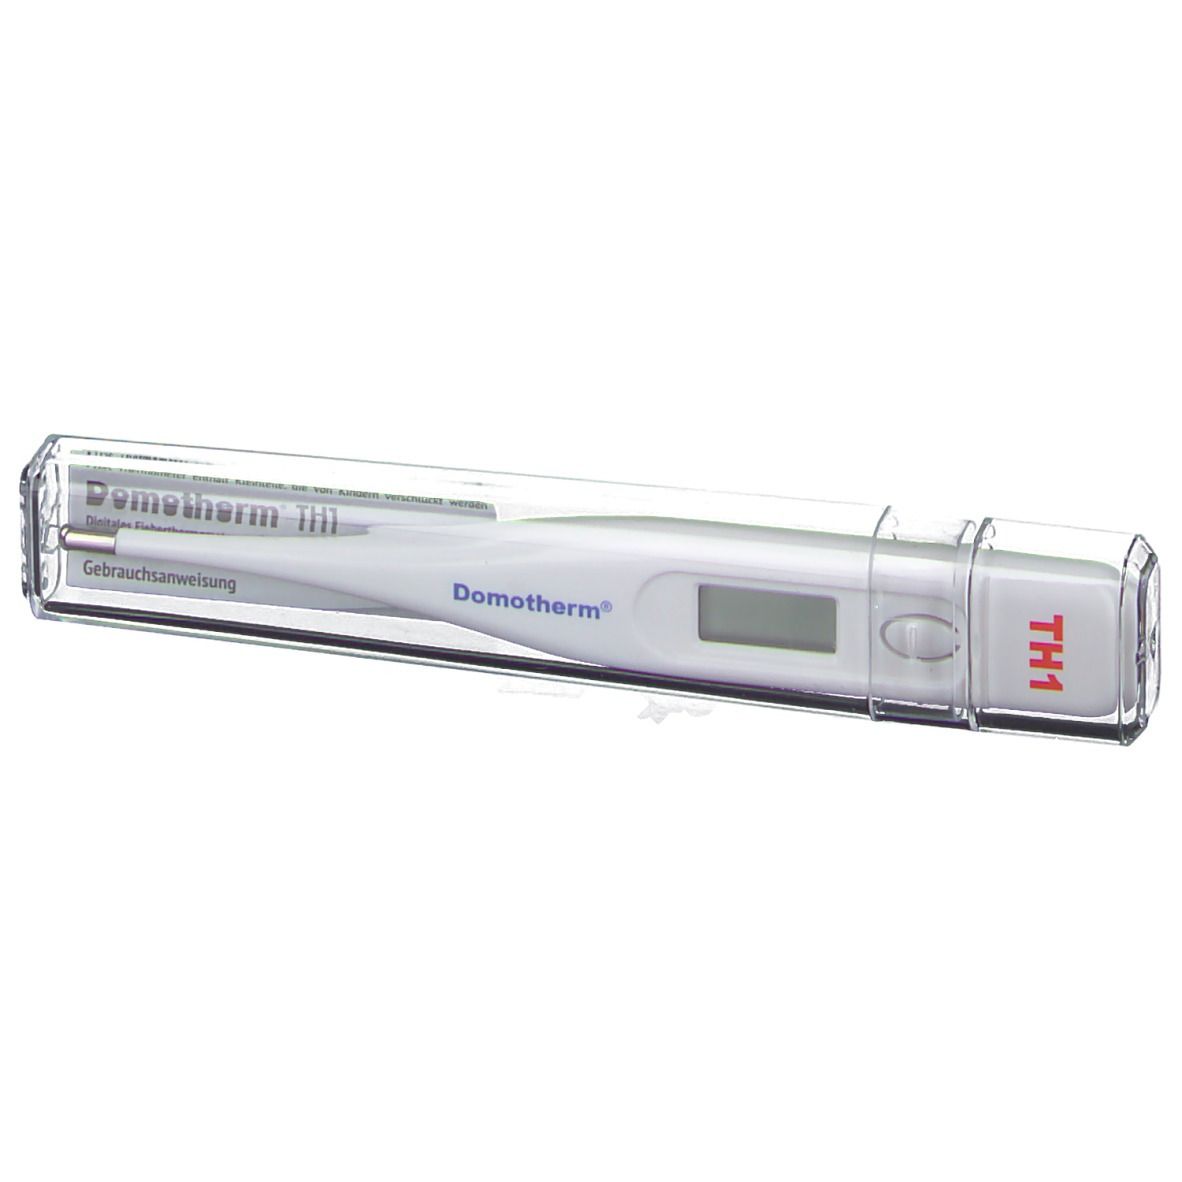 Domotherm® TH1 Fieberthermometer